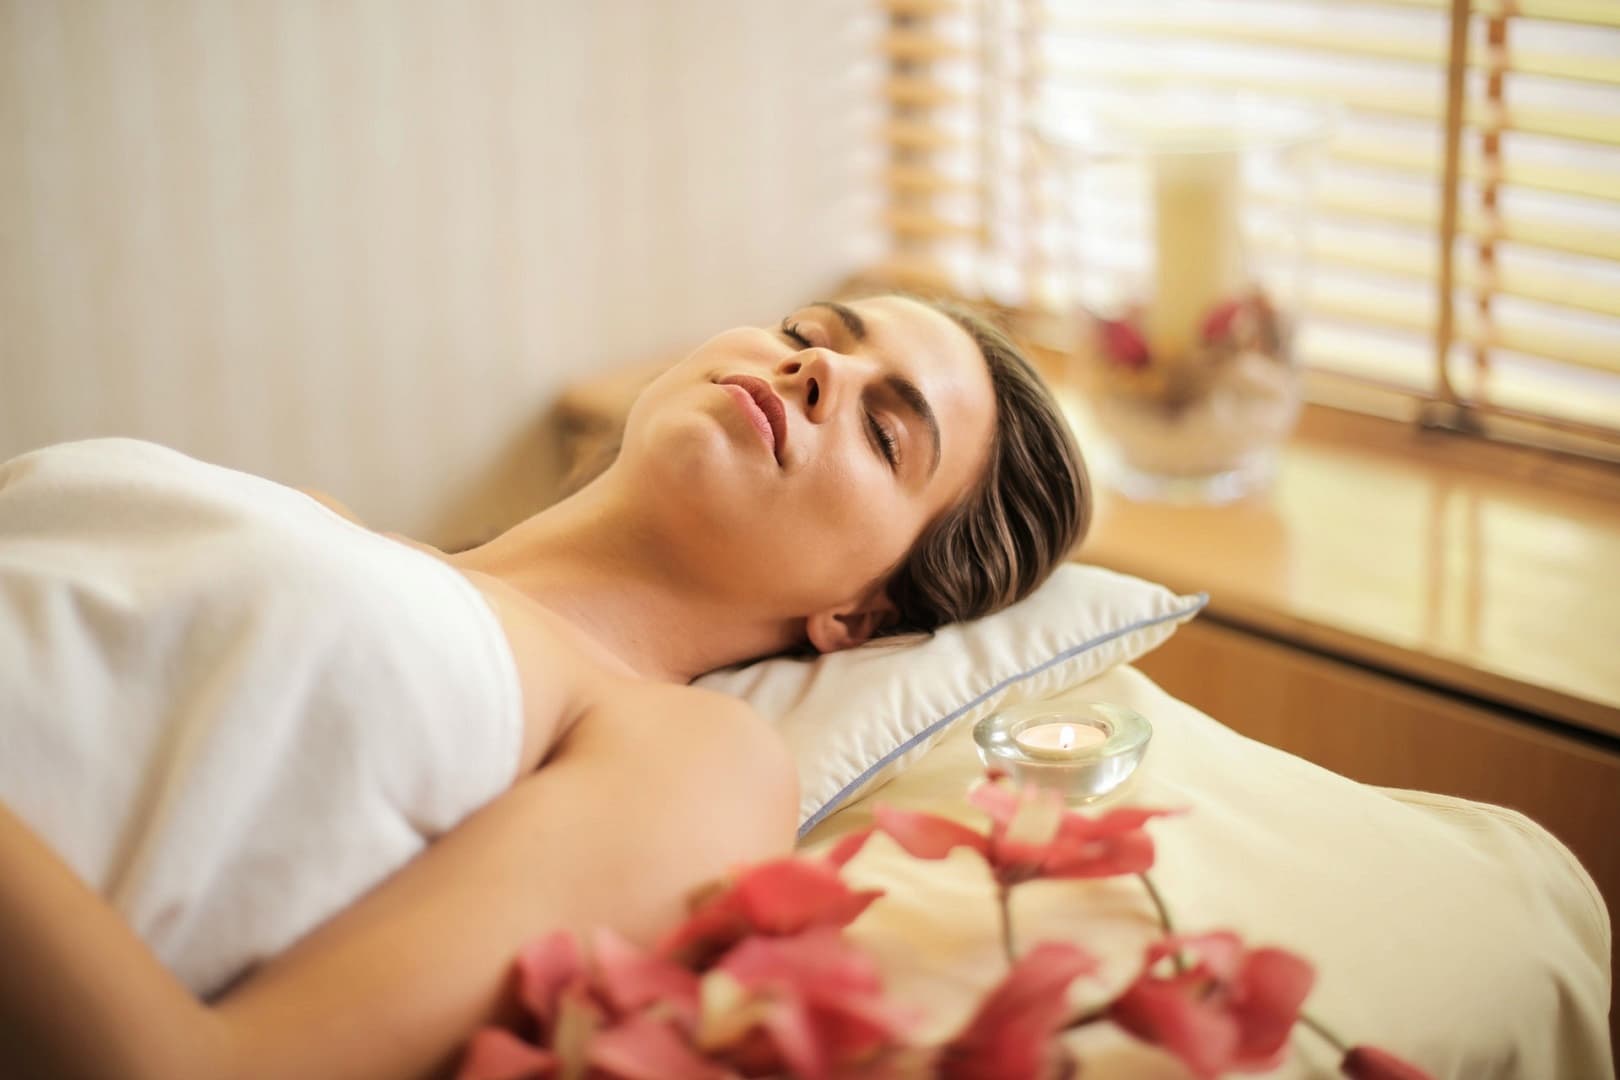 What to expect from natural beauty therapies